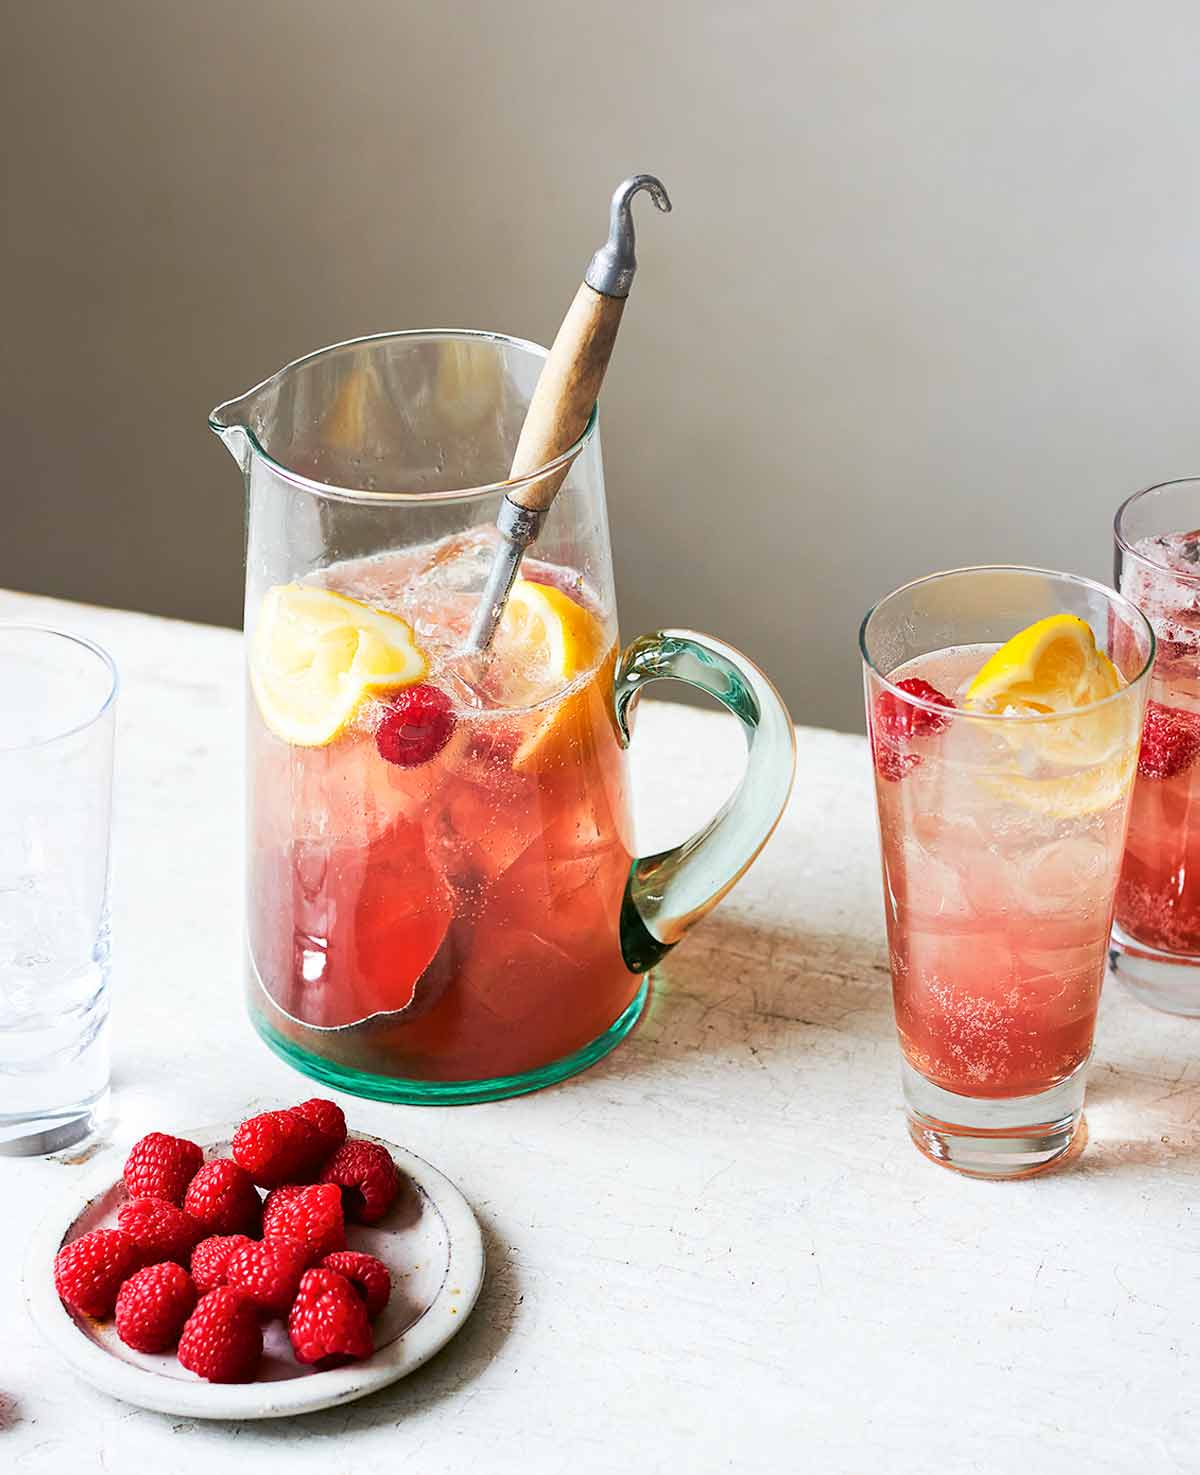 Raspberry vodka lime soda in a pitcher with a large spoon, beside two full glasses, one empty glass, and and a dish of raspberries.